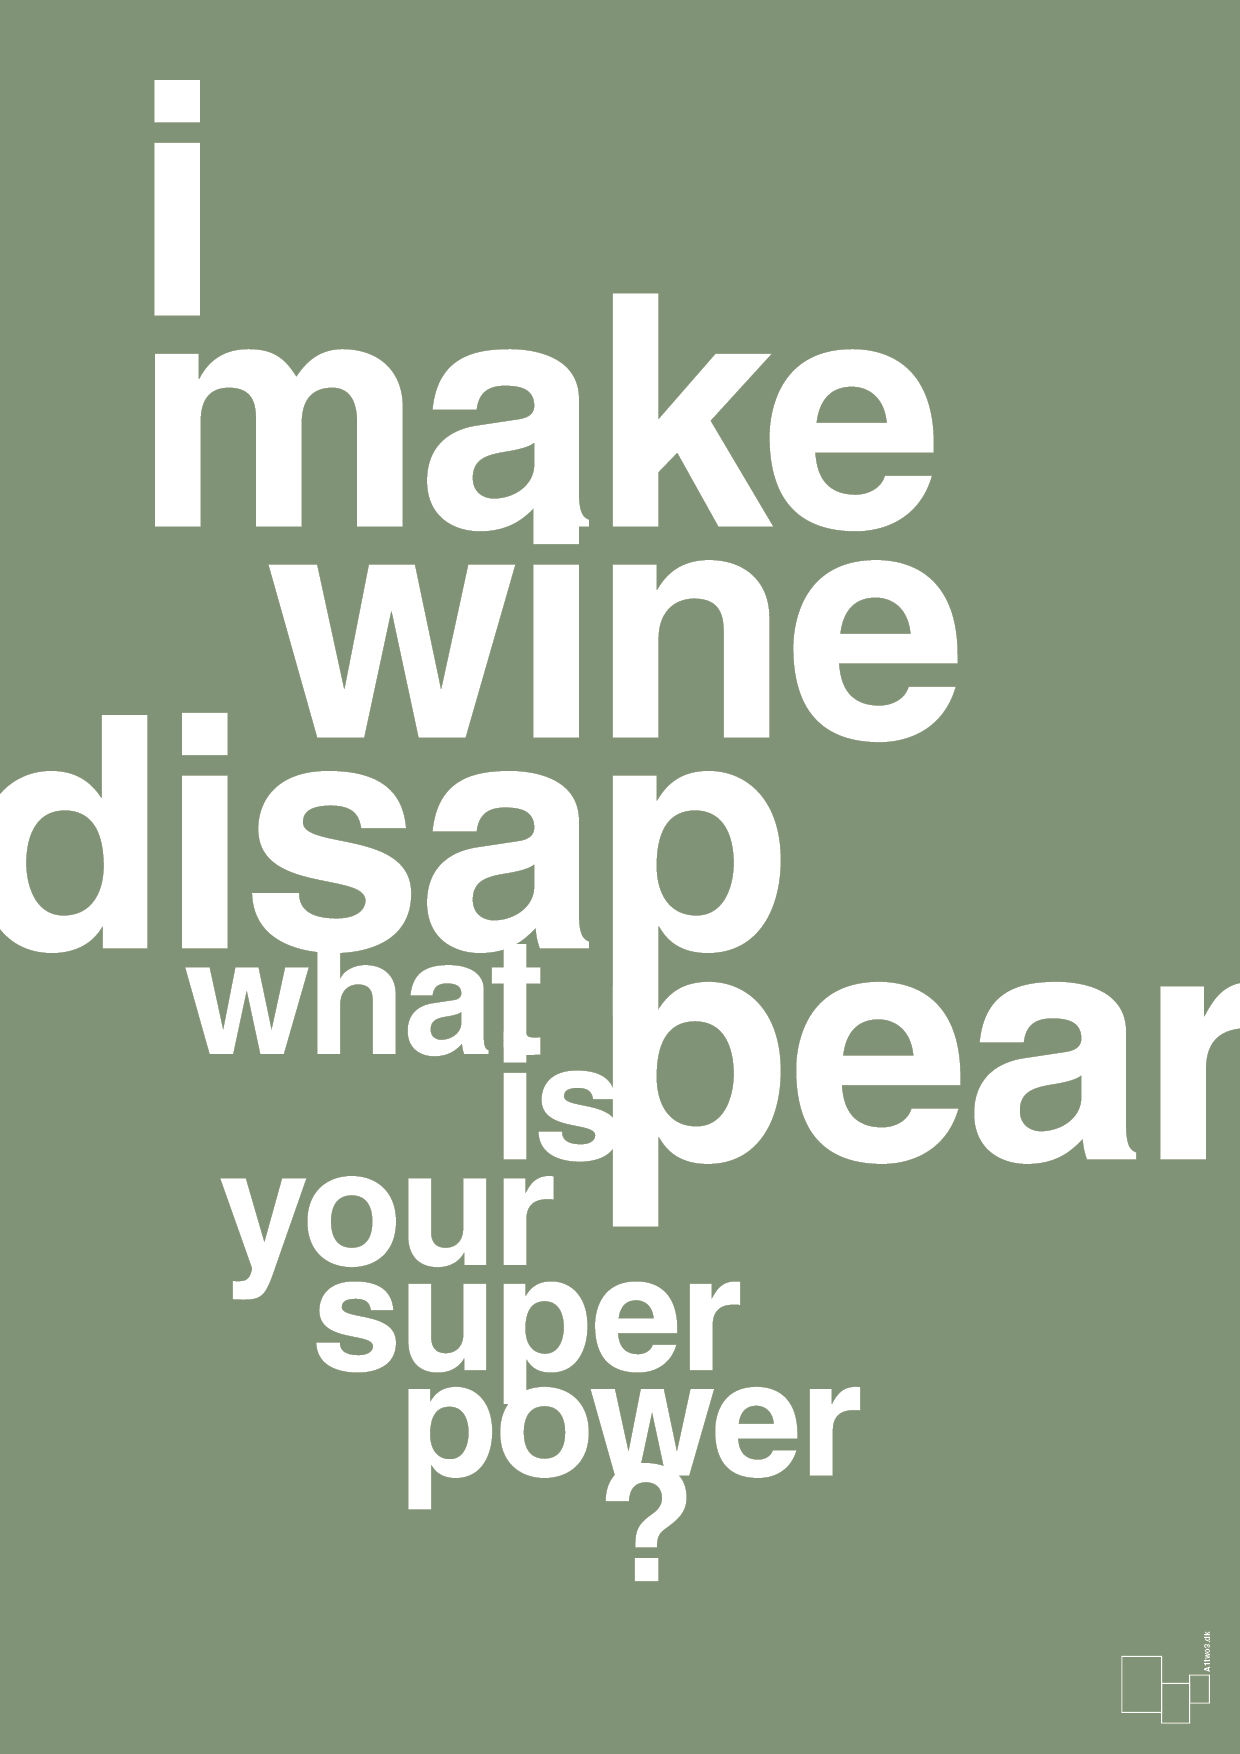 i make wine disappear what is your super power - Plakat med Mad & Drikke i Jade